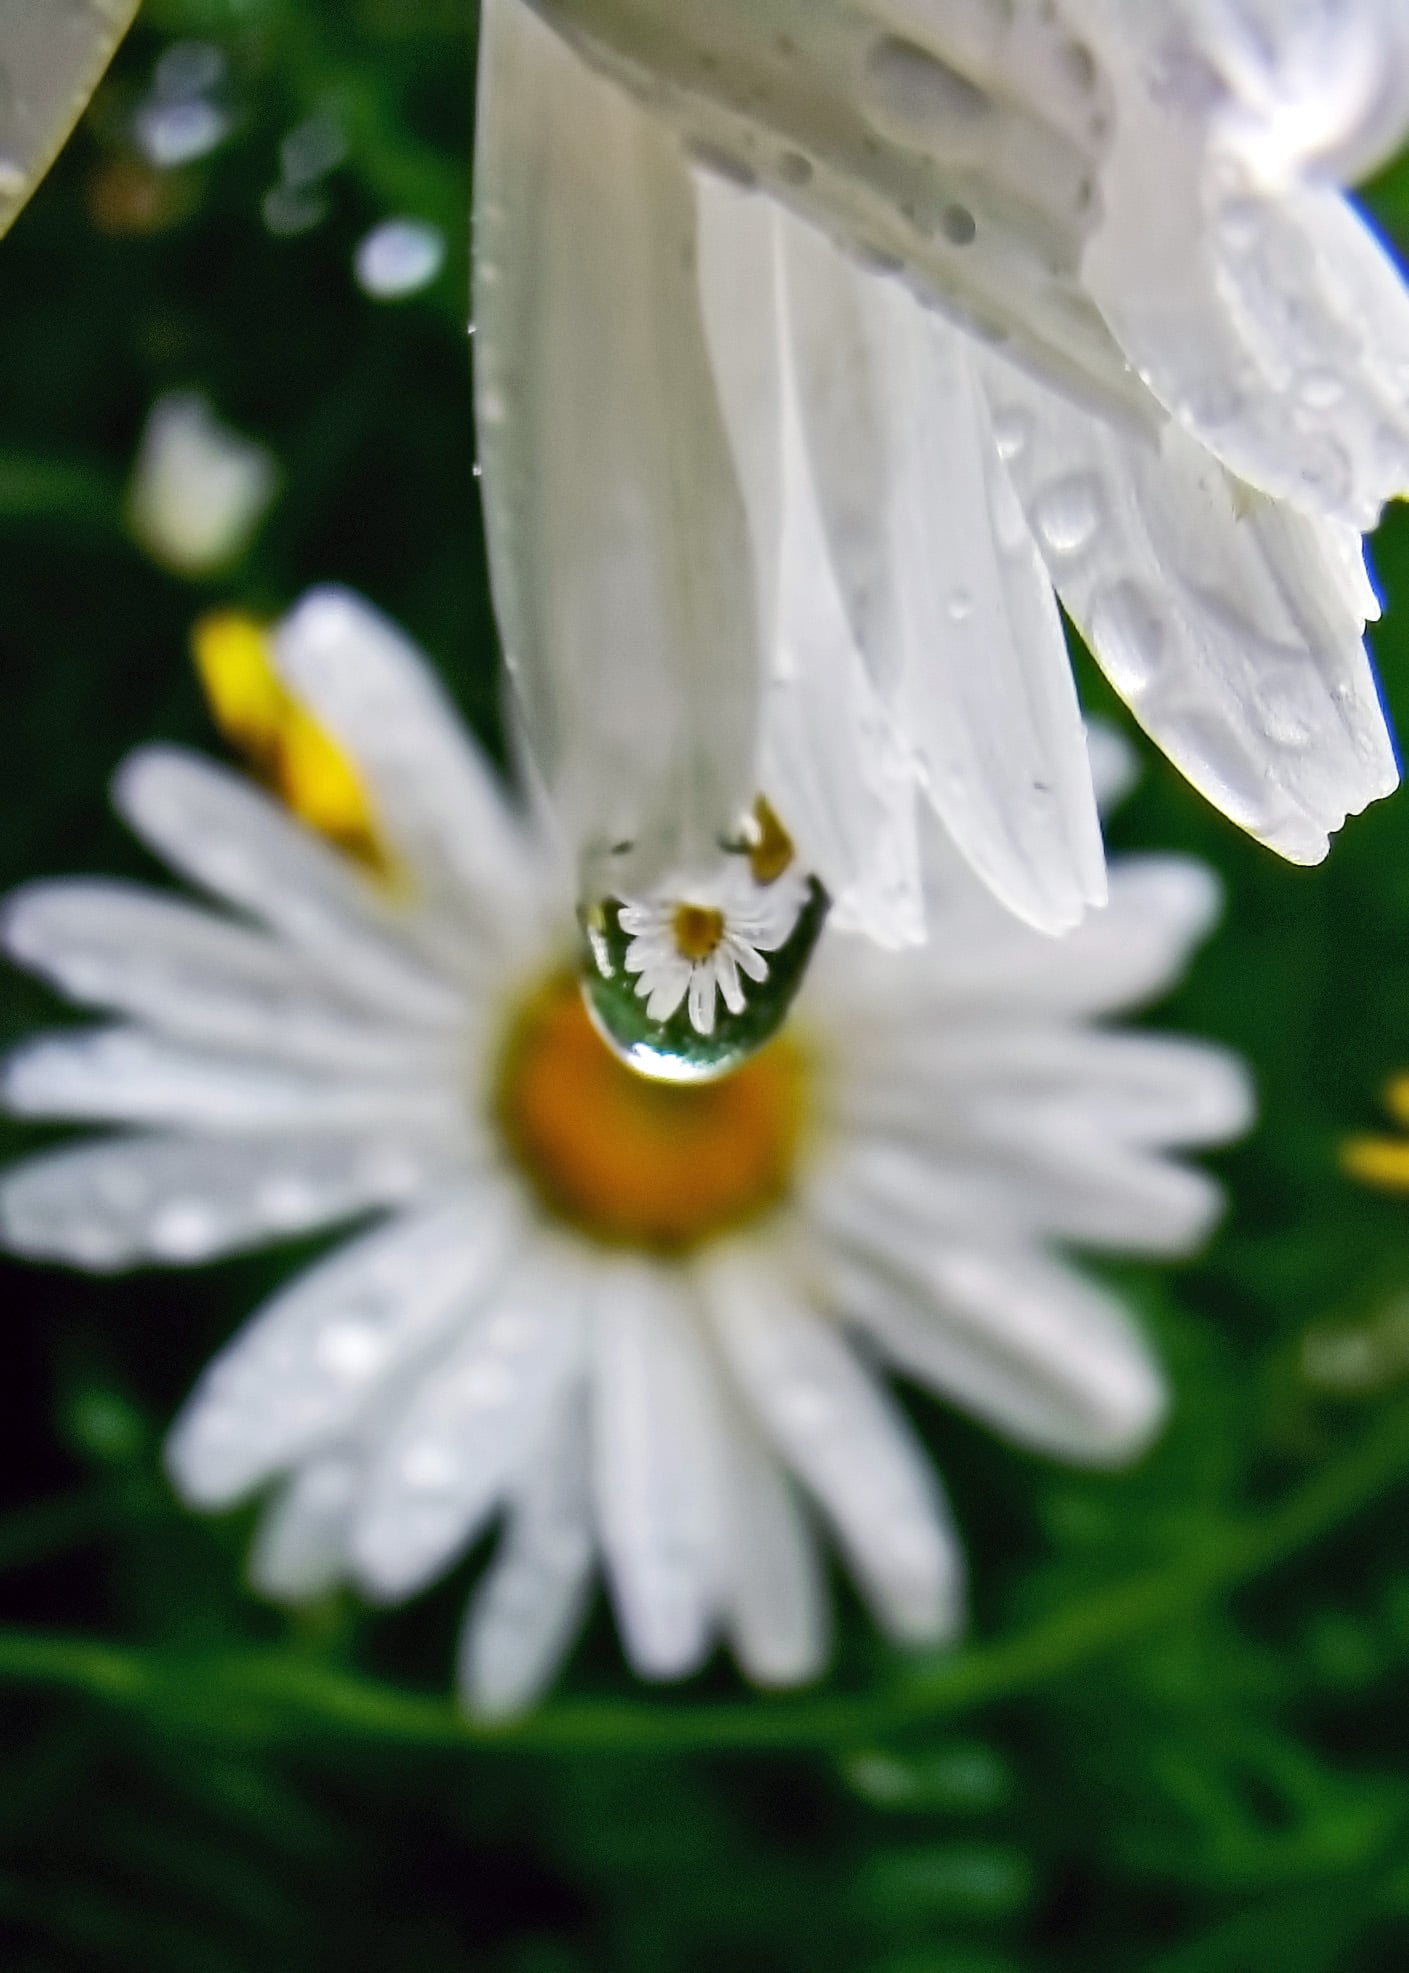 I took this photo in my back yard. A water drop with the daisy reflection in it.